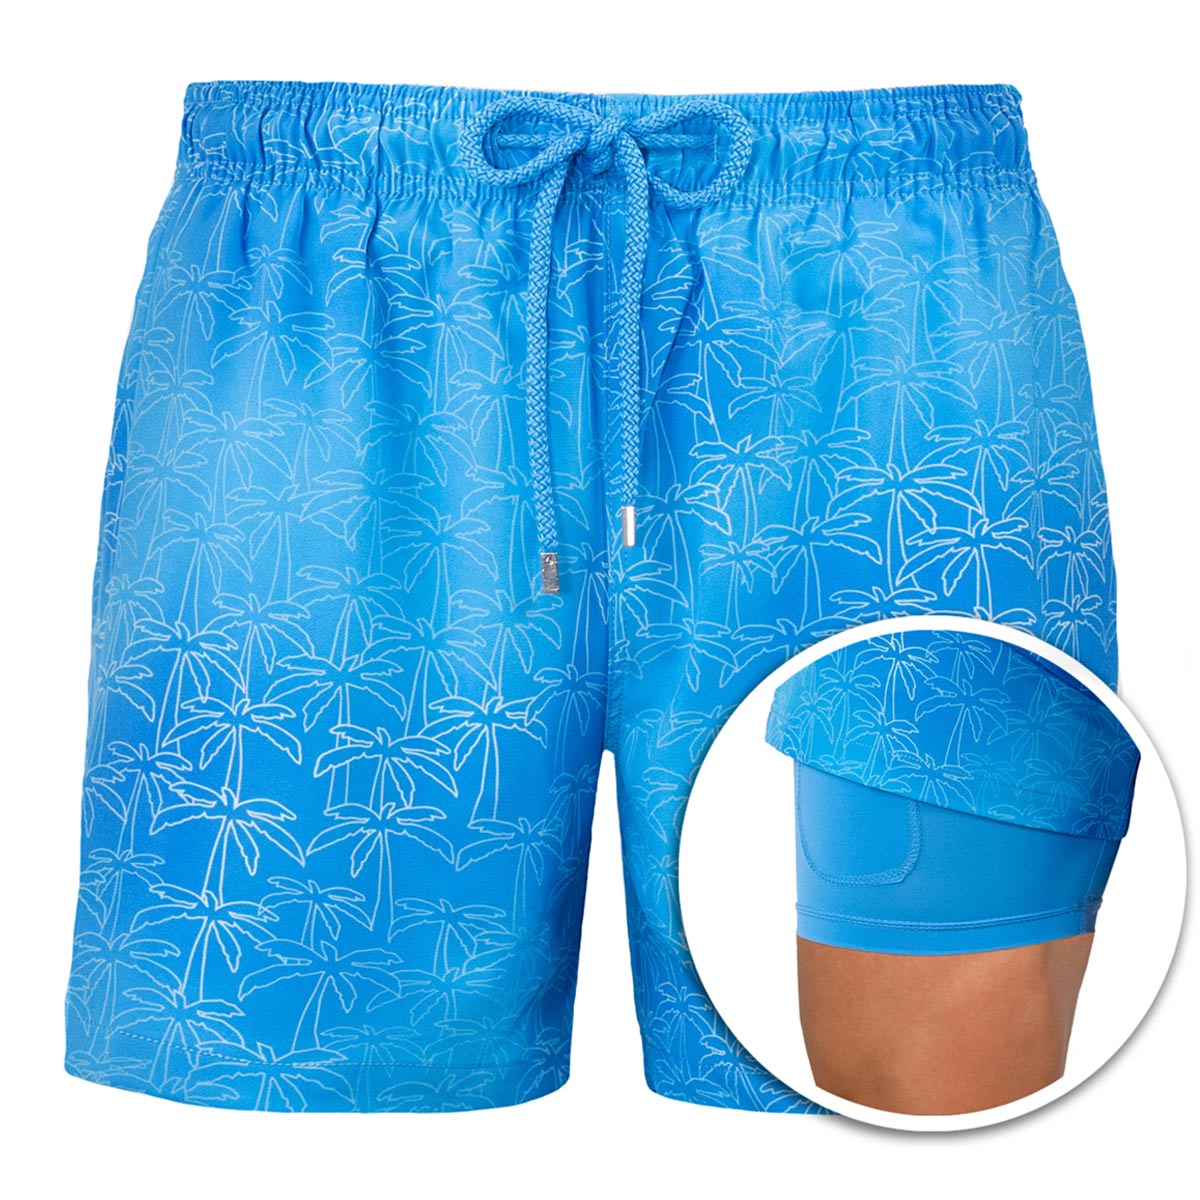 Keep Palm - Mens Swim Trunks with Compression Liner